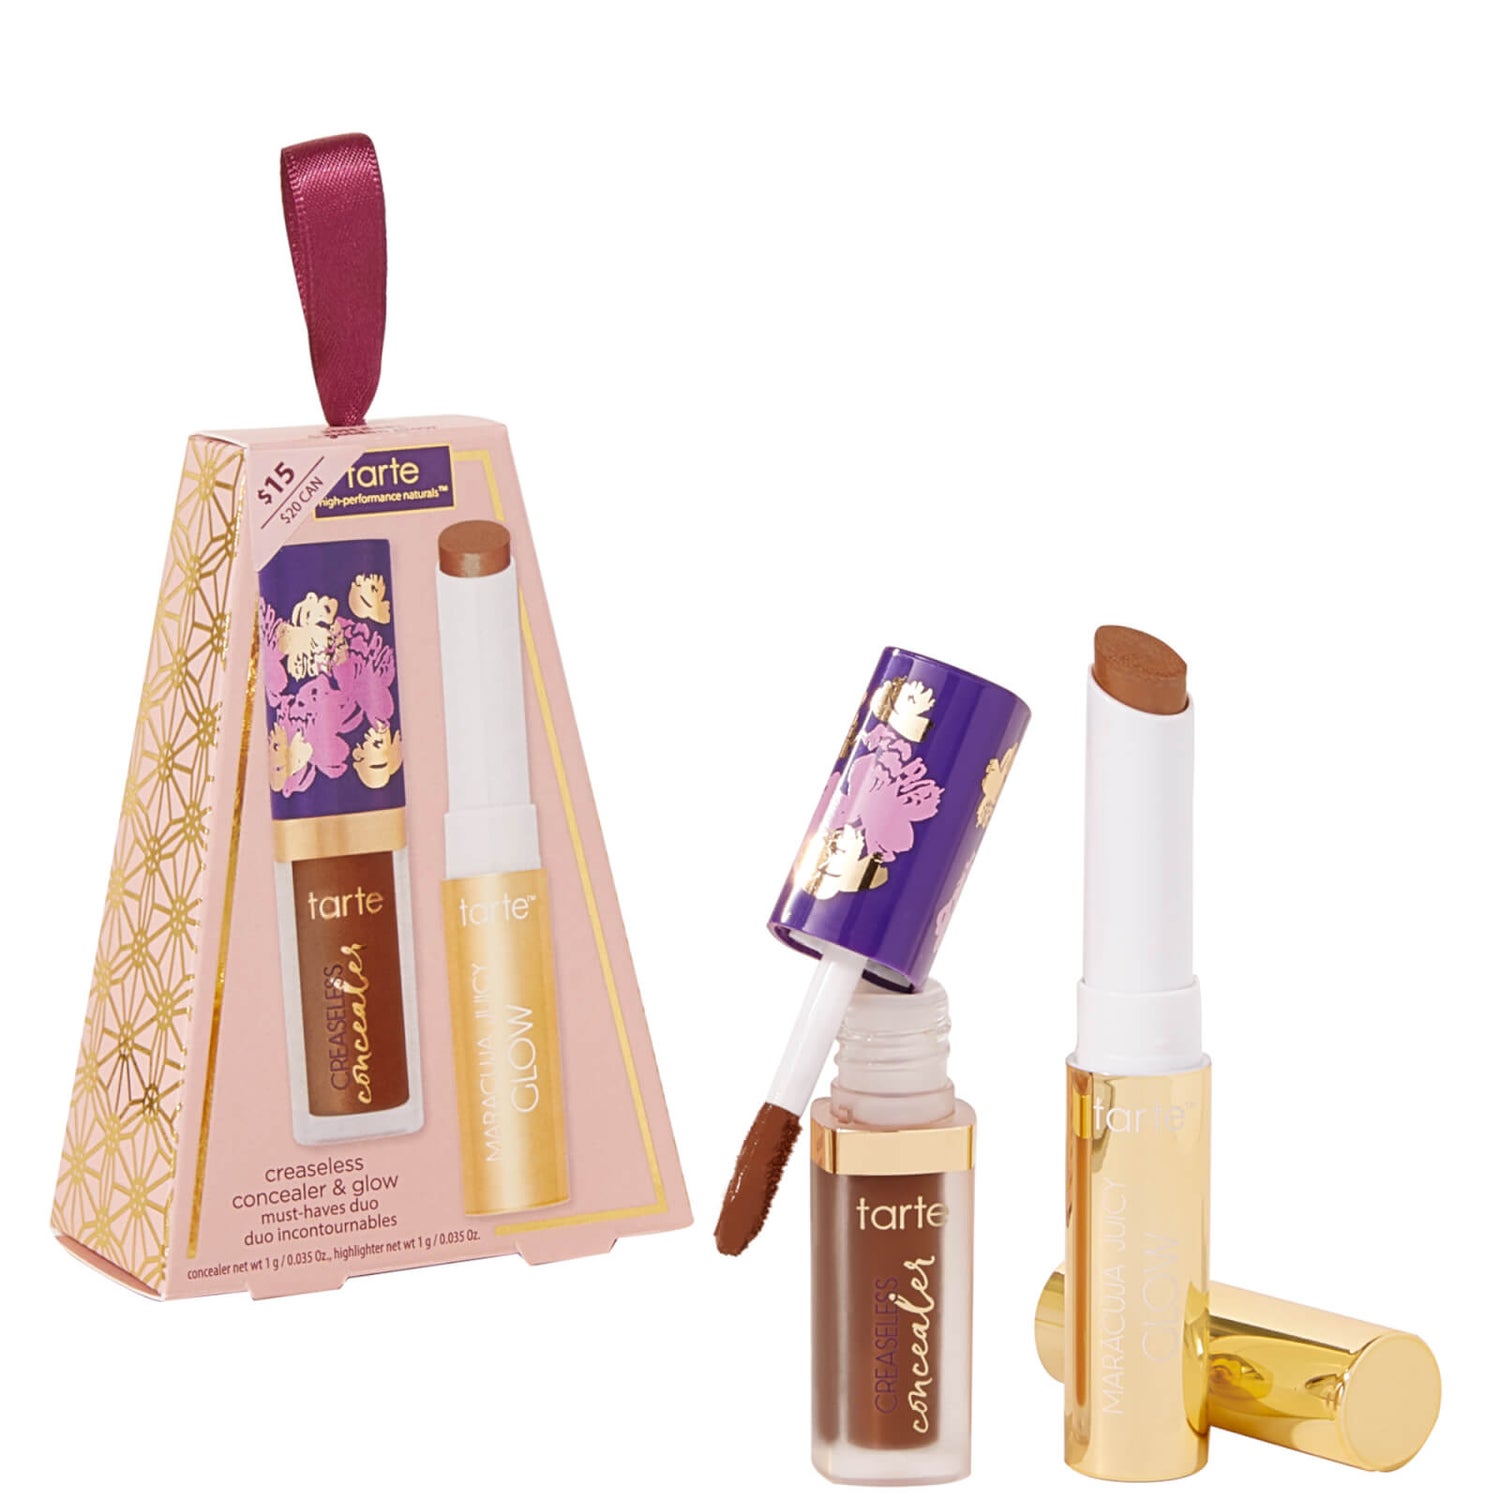 Tarte Creaseless Concealer and Glow Must-Haves Duo - Deep (Worth $26.00)